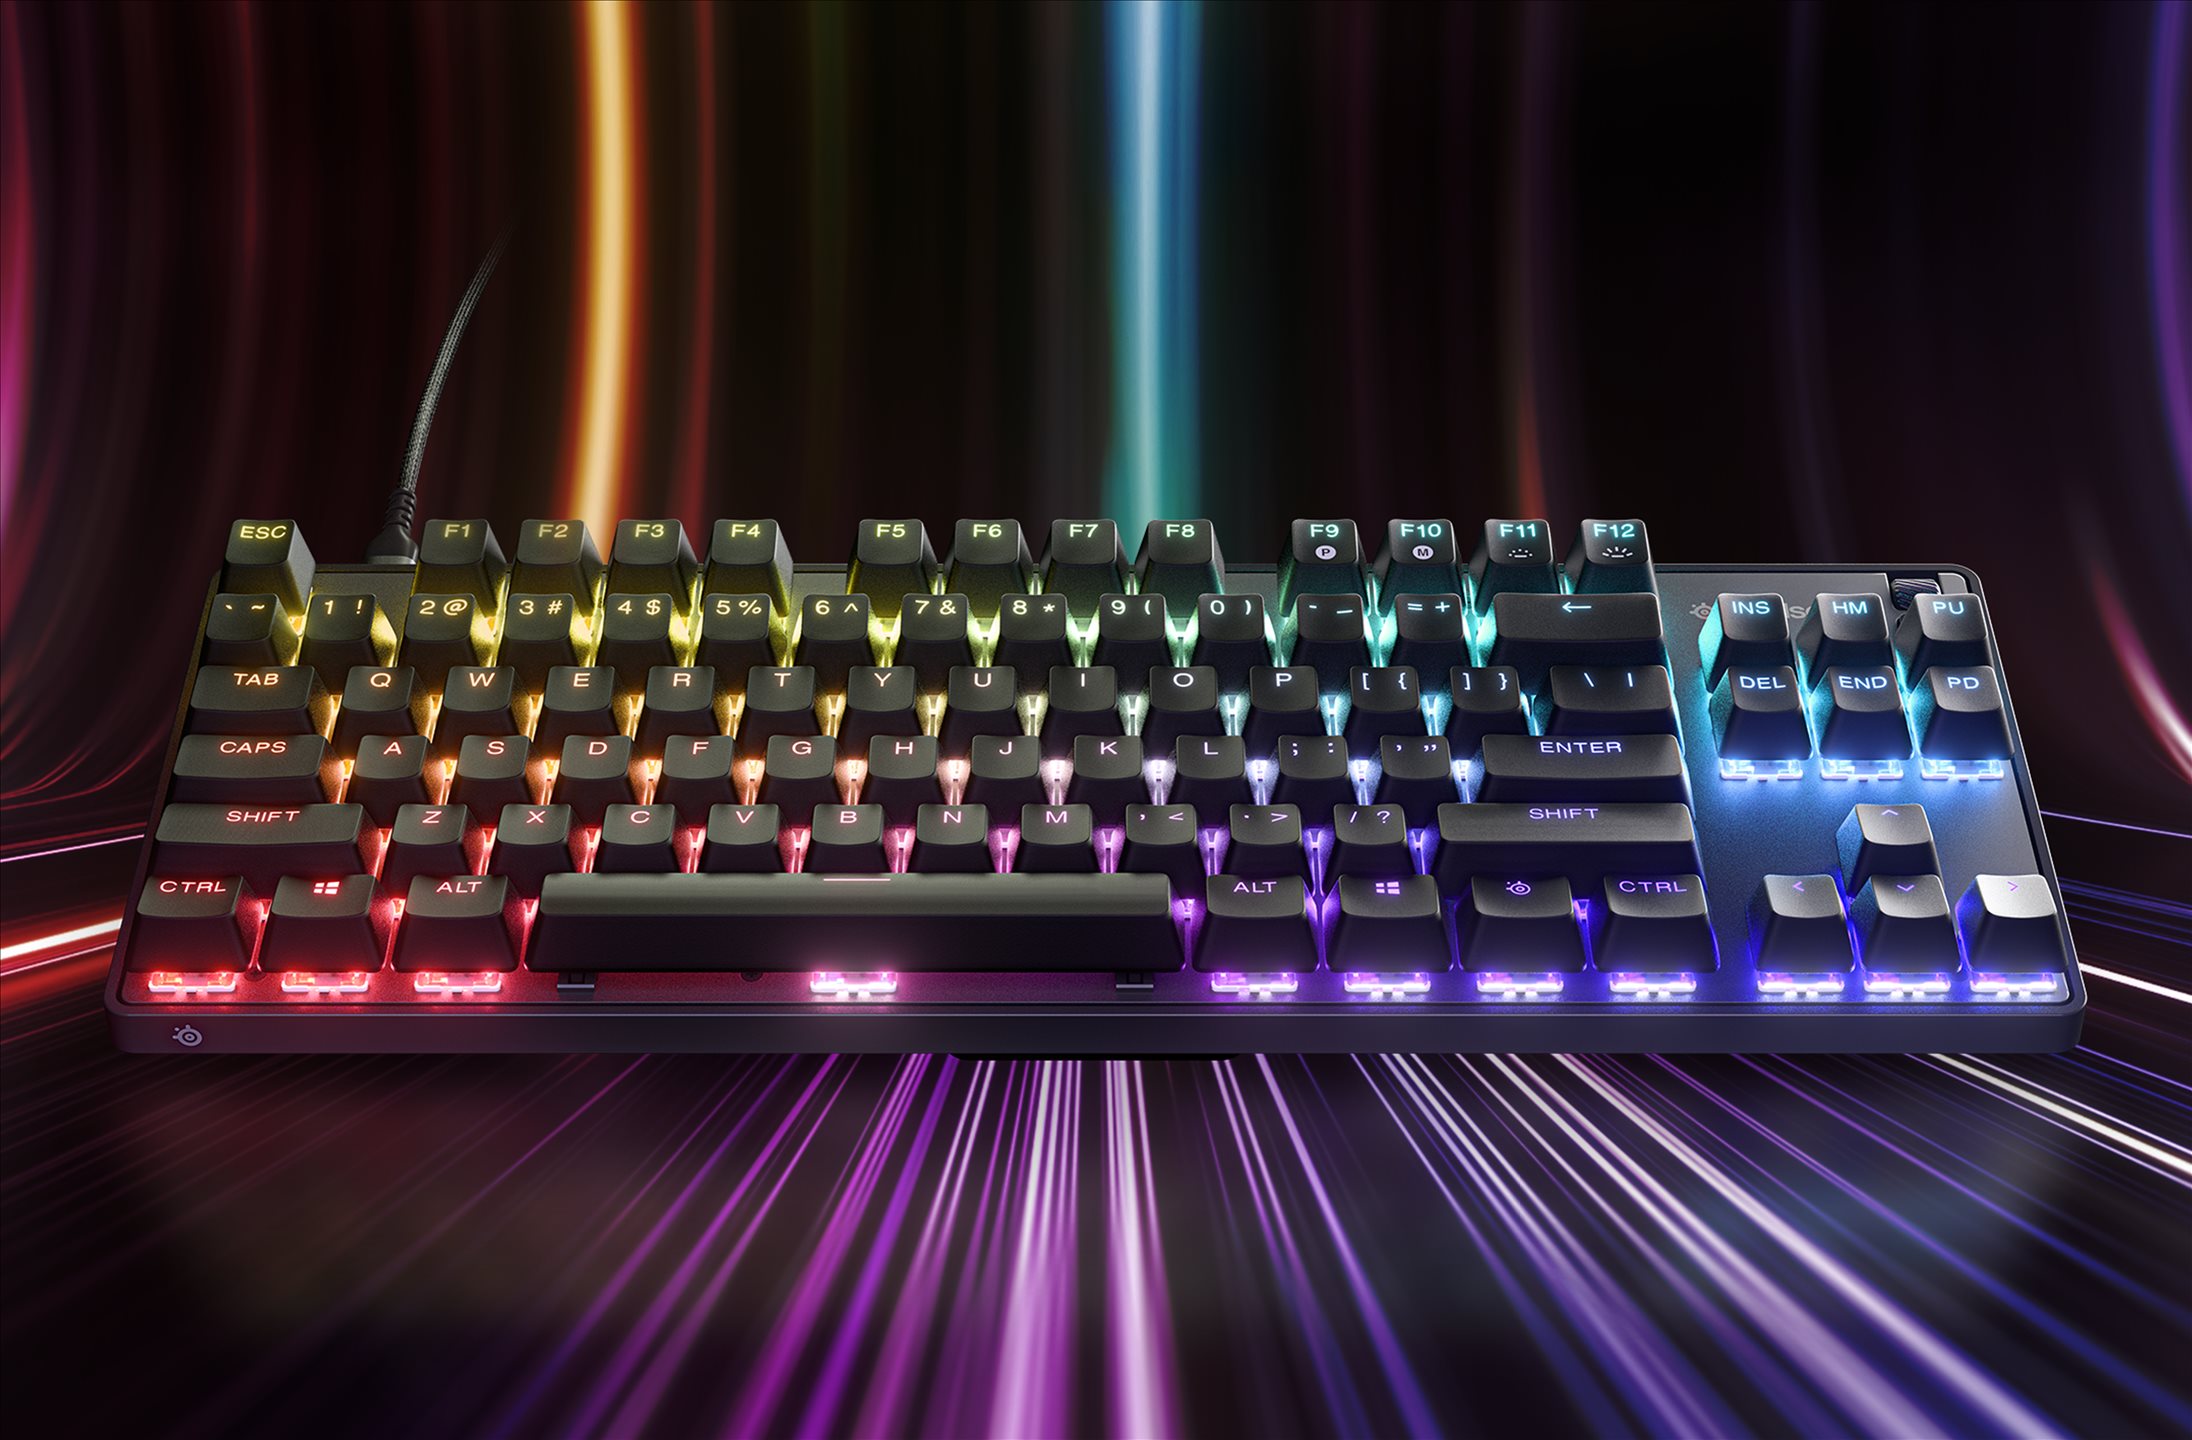 SteelSeries just claimed the world’s fastest optical switches in their new gaming keyboard